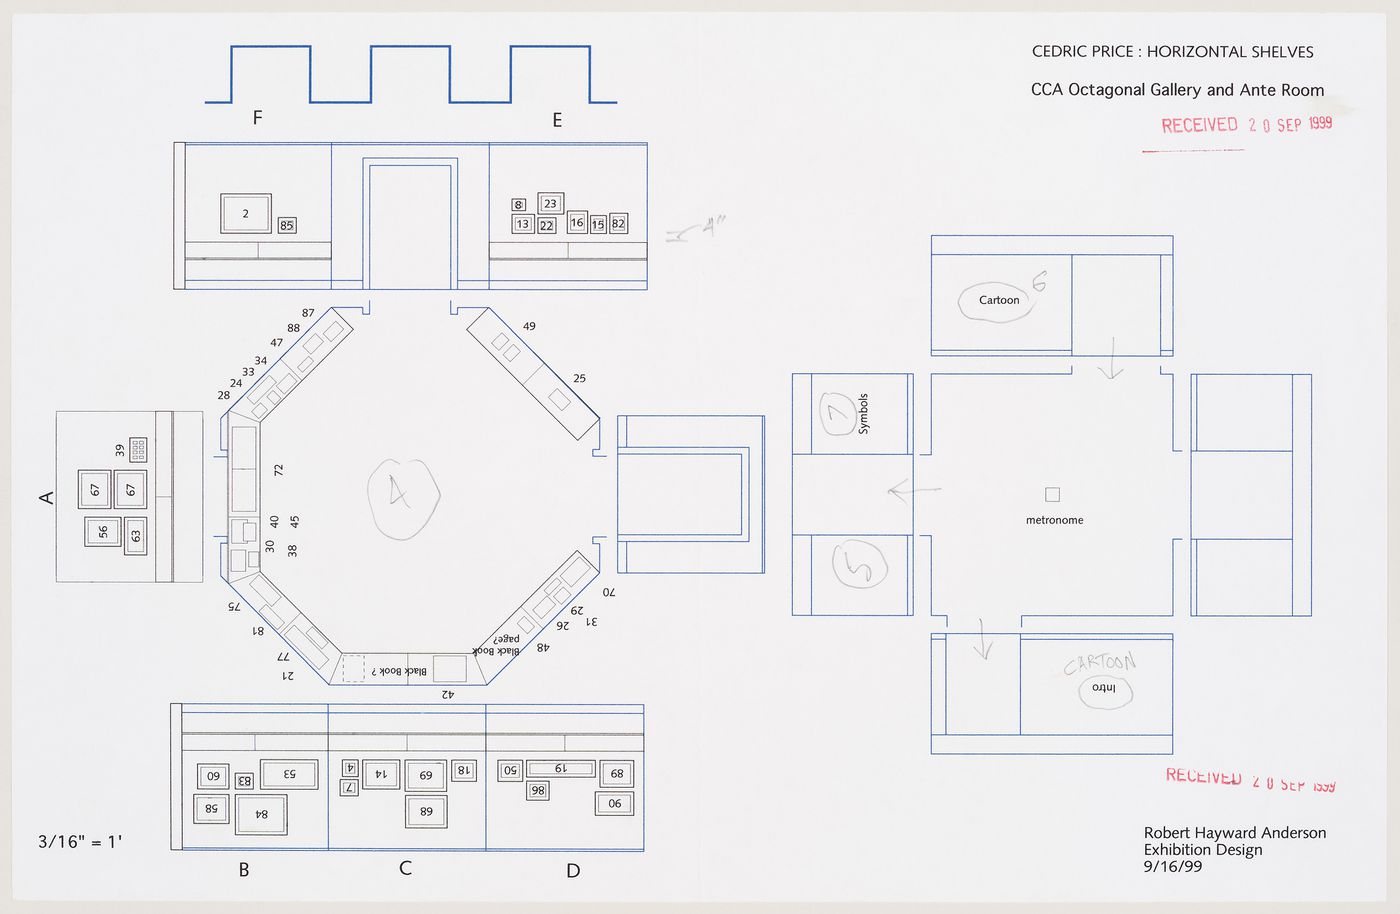 Plan for the Octagonal Gallery and Ante Room at the Canadian Centre for Architecture for the exhibition "Cedric Price: Mean Time" (document from Mean project records)